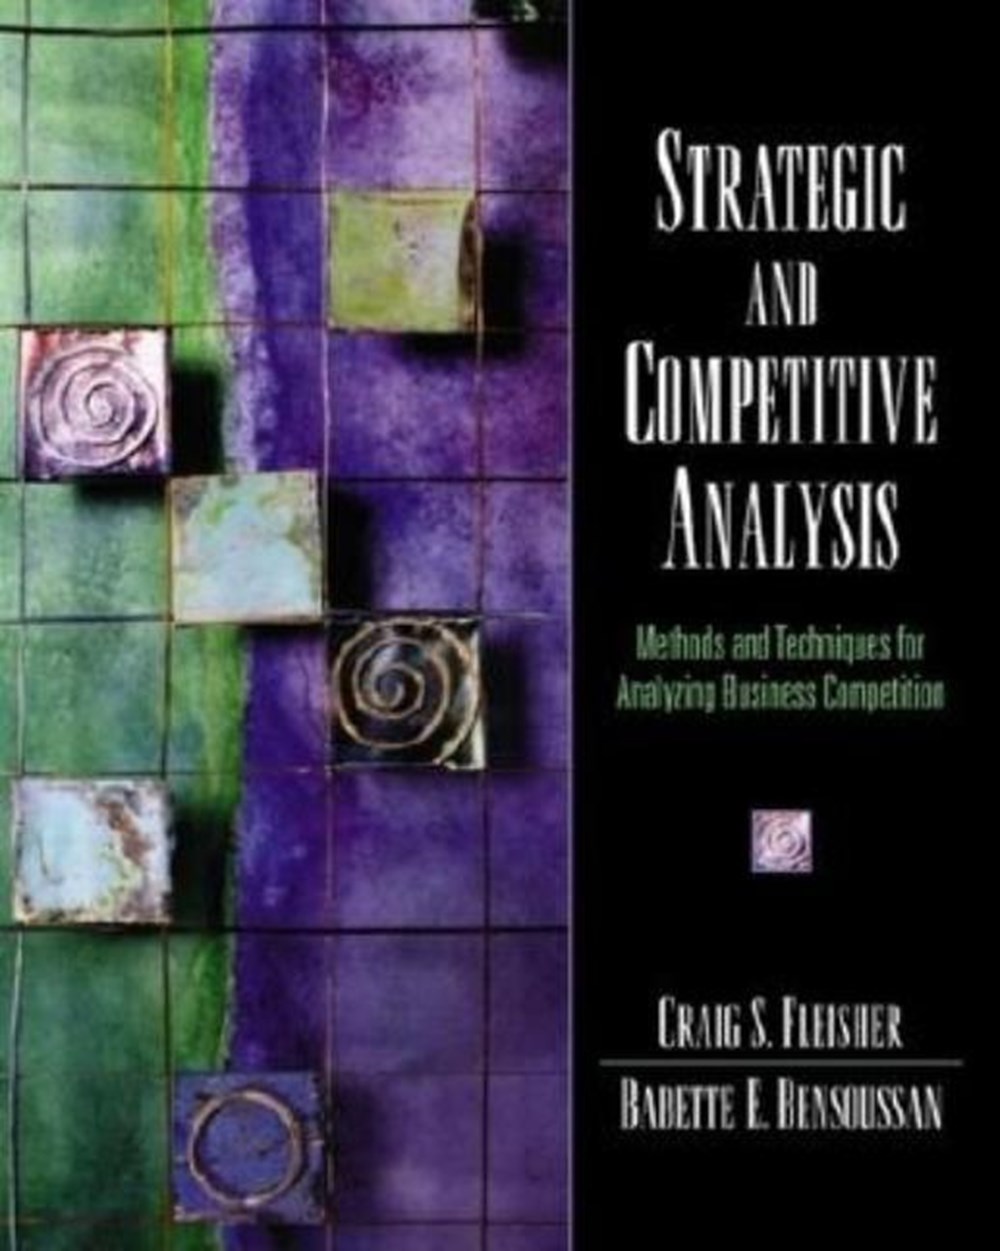 Strategic and Competitive Analysis: Methods and Techniques for Analyzing Business Competition